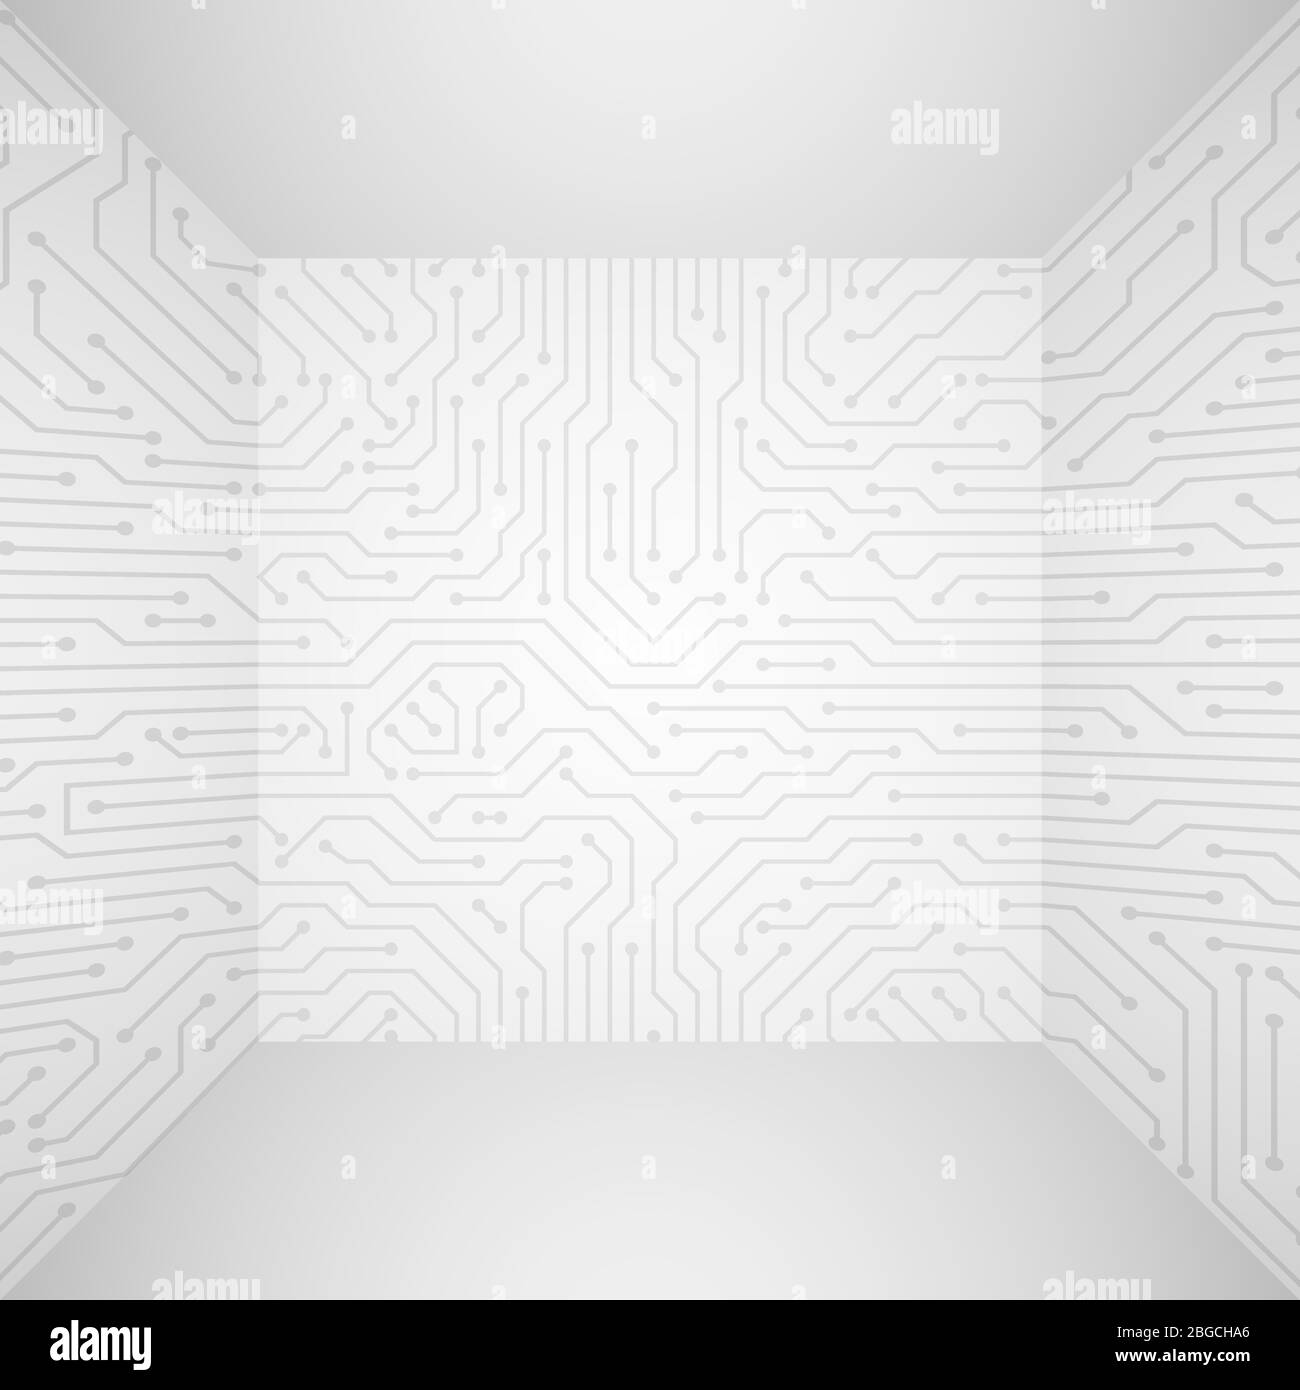 Abstract modern white technology 3d vector background with circuit board pattern. Information tech company concept. Technology circuit background, connect board integration space illustration Stock Vector